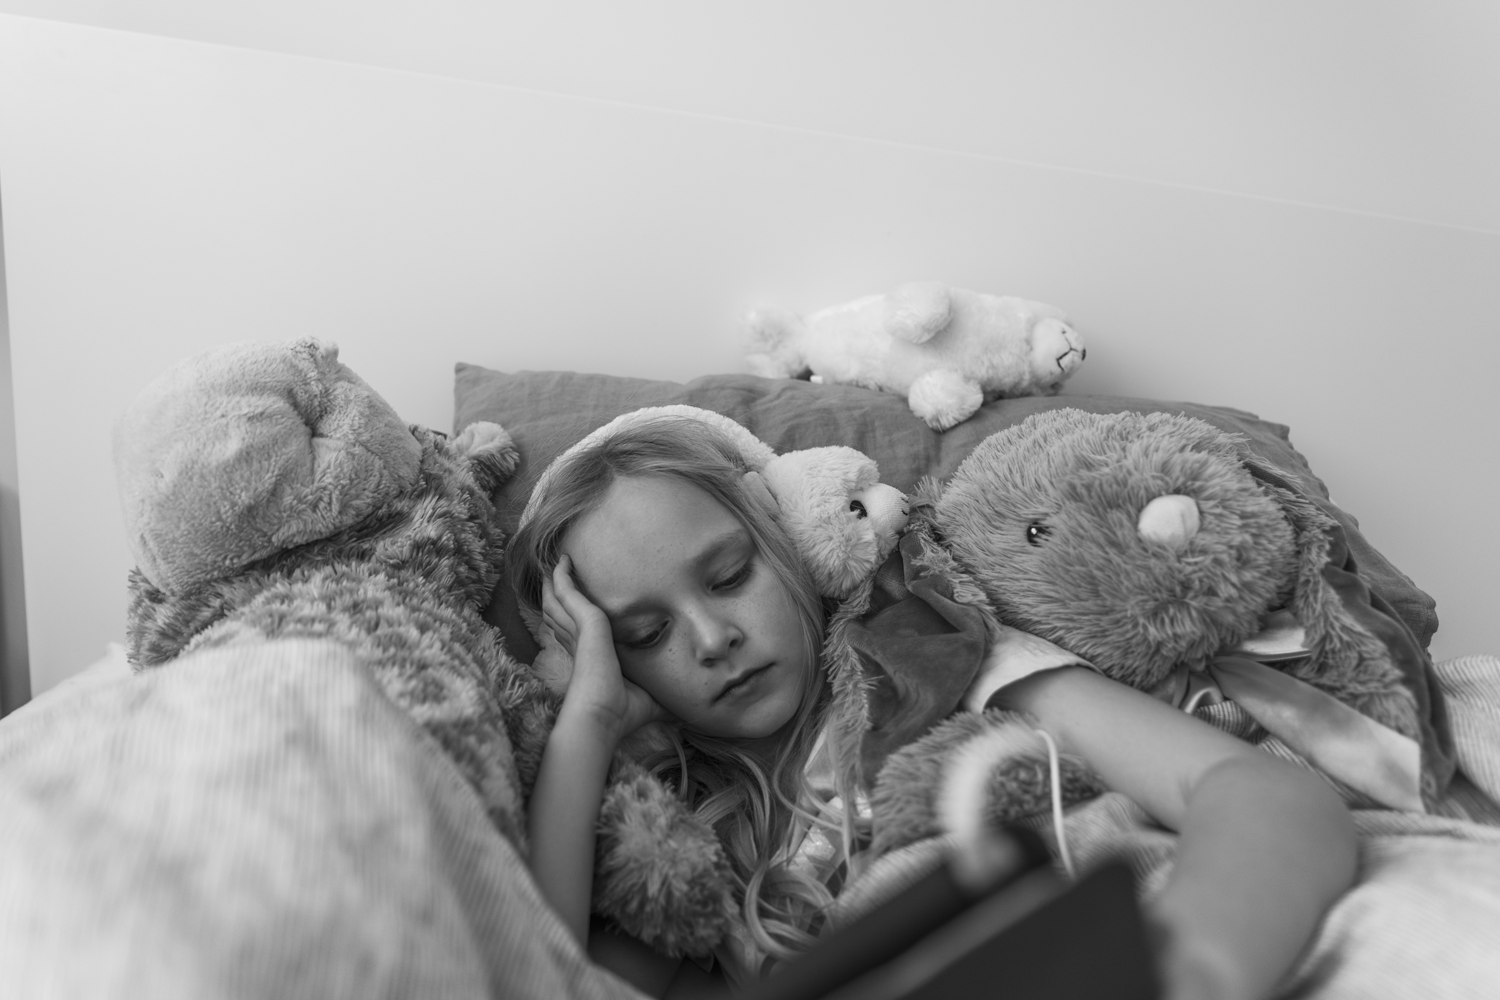 Black and white photograph of a portrait of a girl lying amongst soft toys wearing headphones.